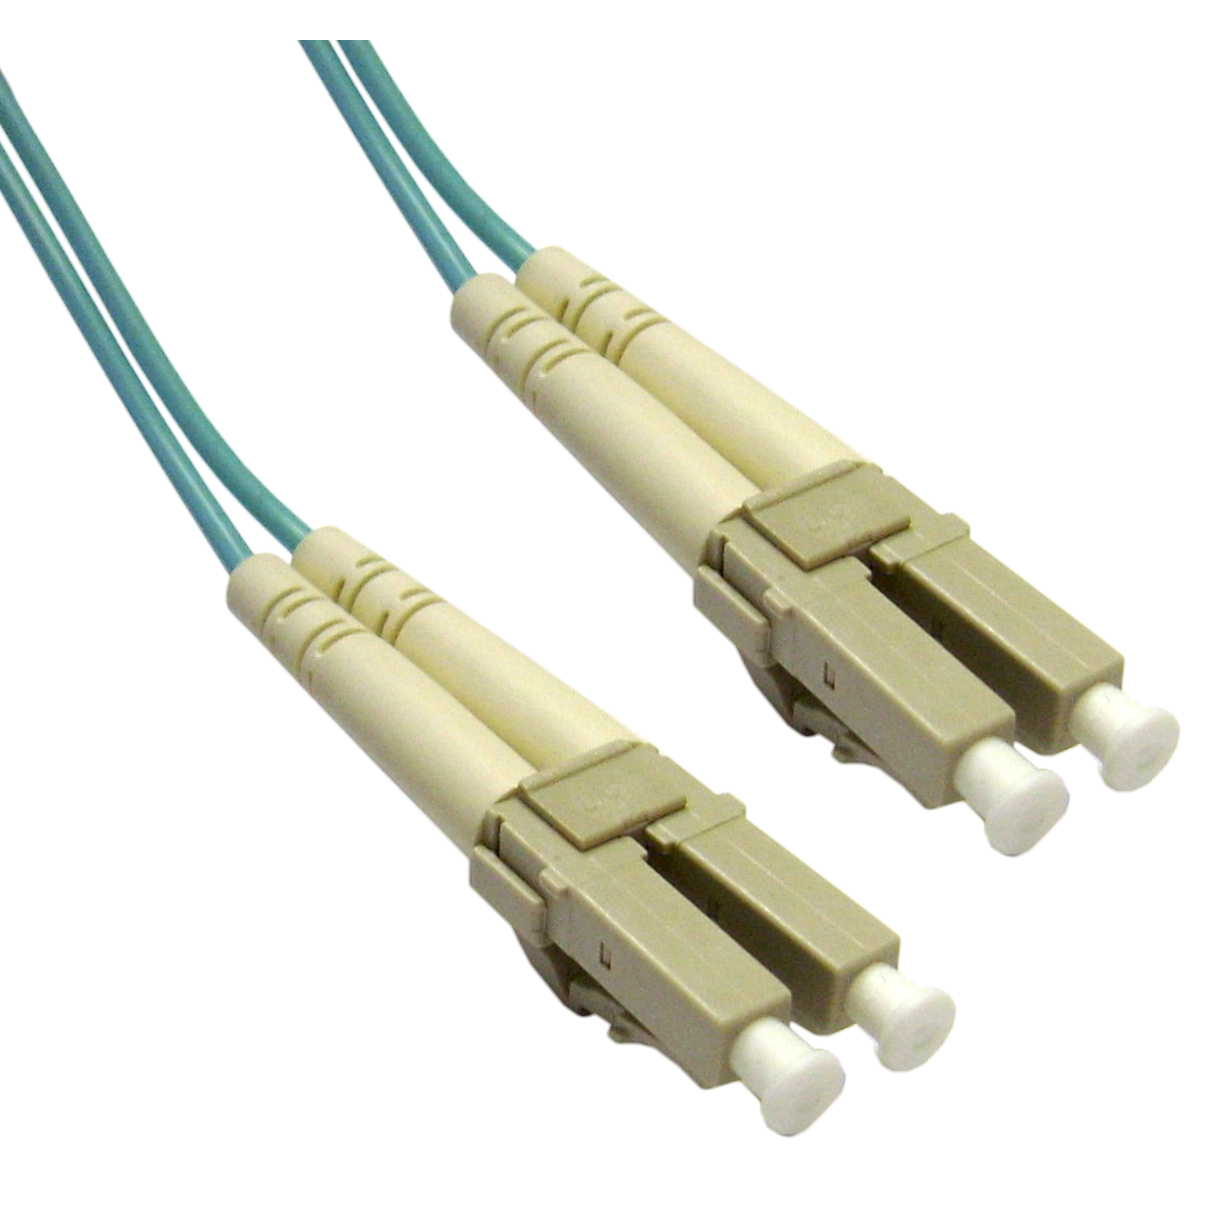 ADD-LC-LC-7M5OM4 ADDON NETWORKS THIS IS A 7M LC (MALE) TO LC (MALE) AQUA DUPLEX RISER-RATED FIBER PATCH CABLE. A